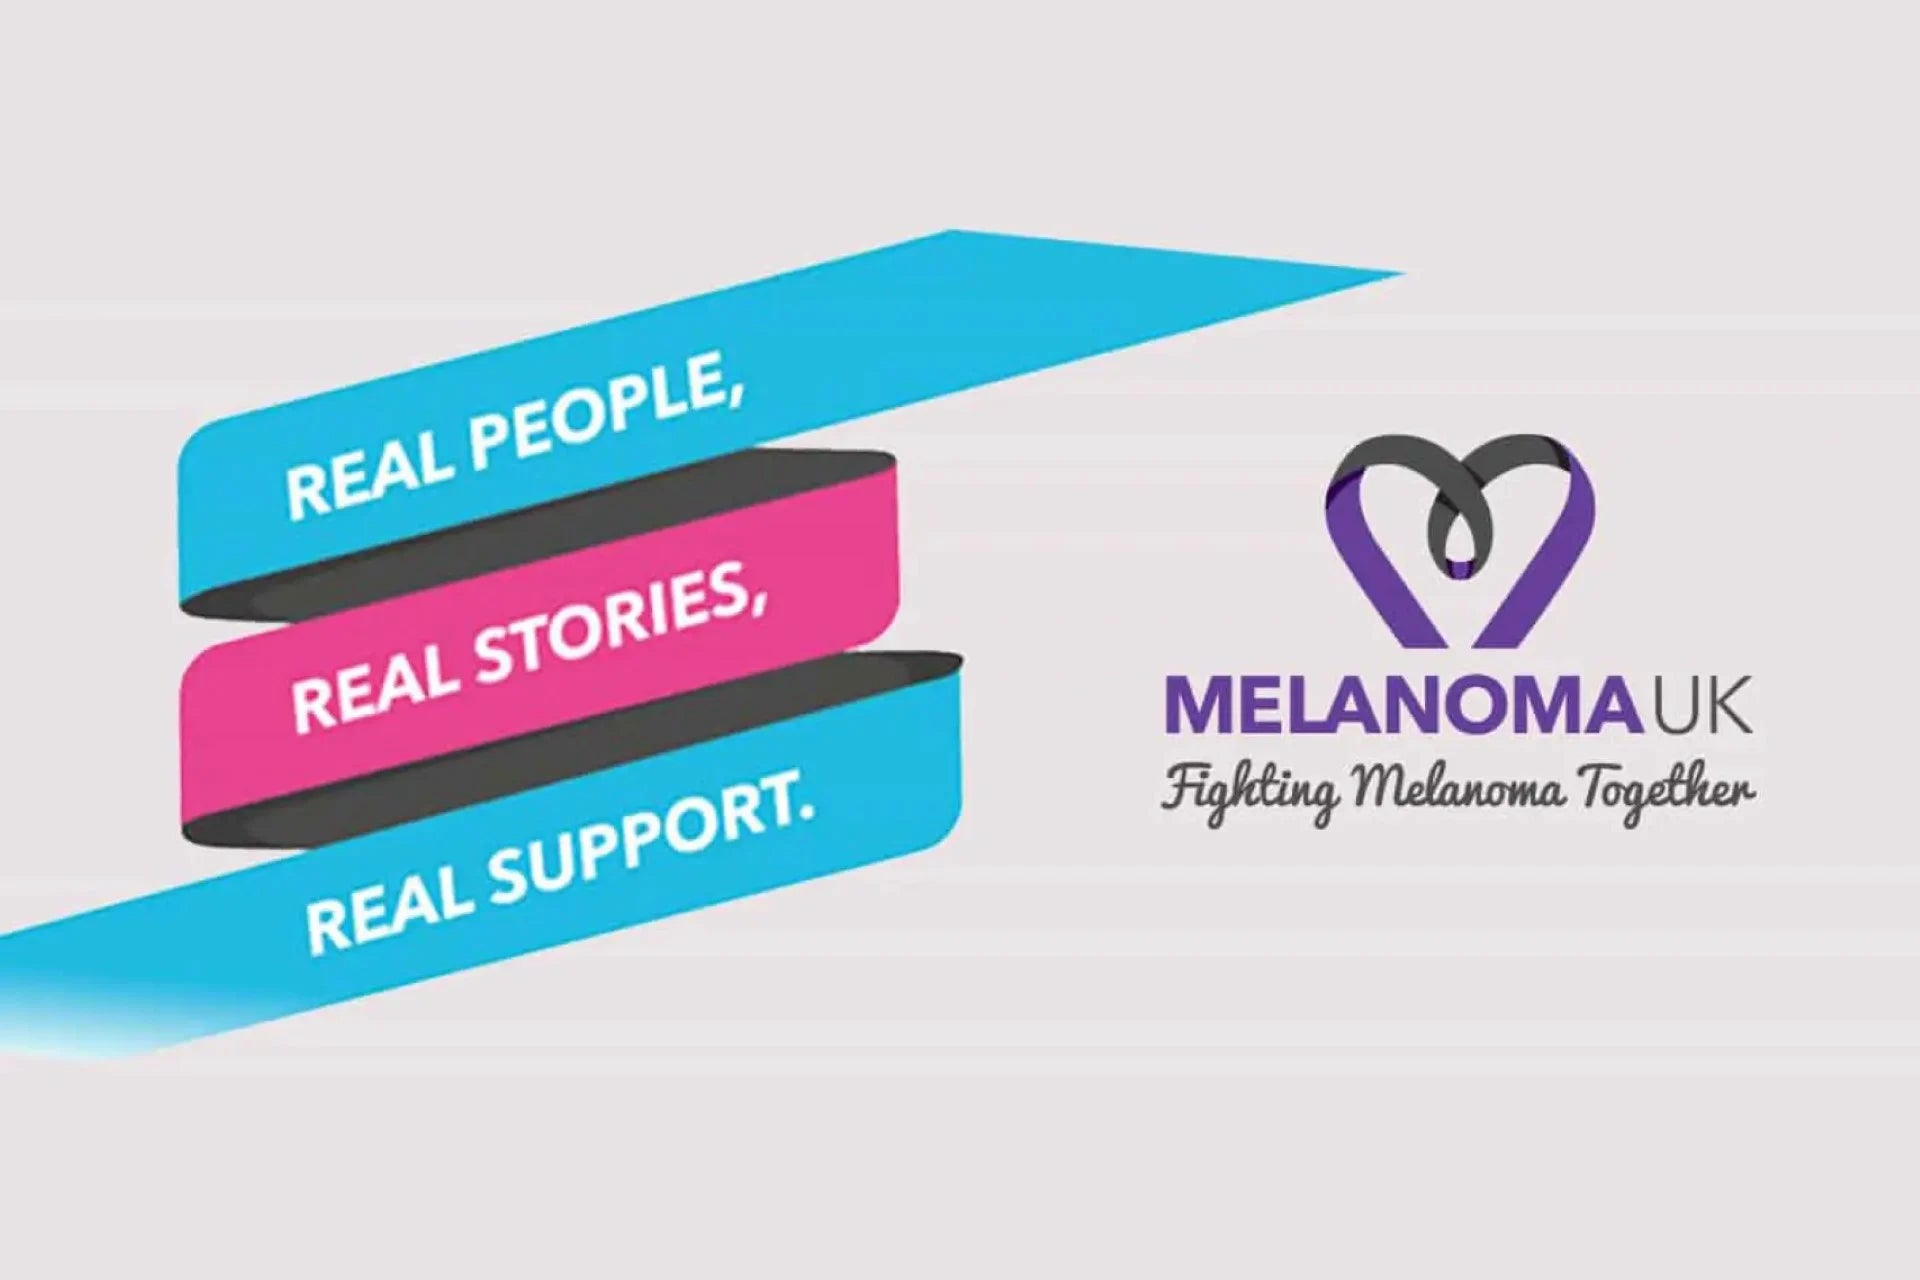 Melanoma UK: how their amazing work could help you